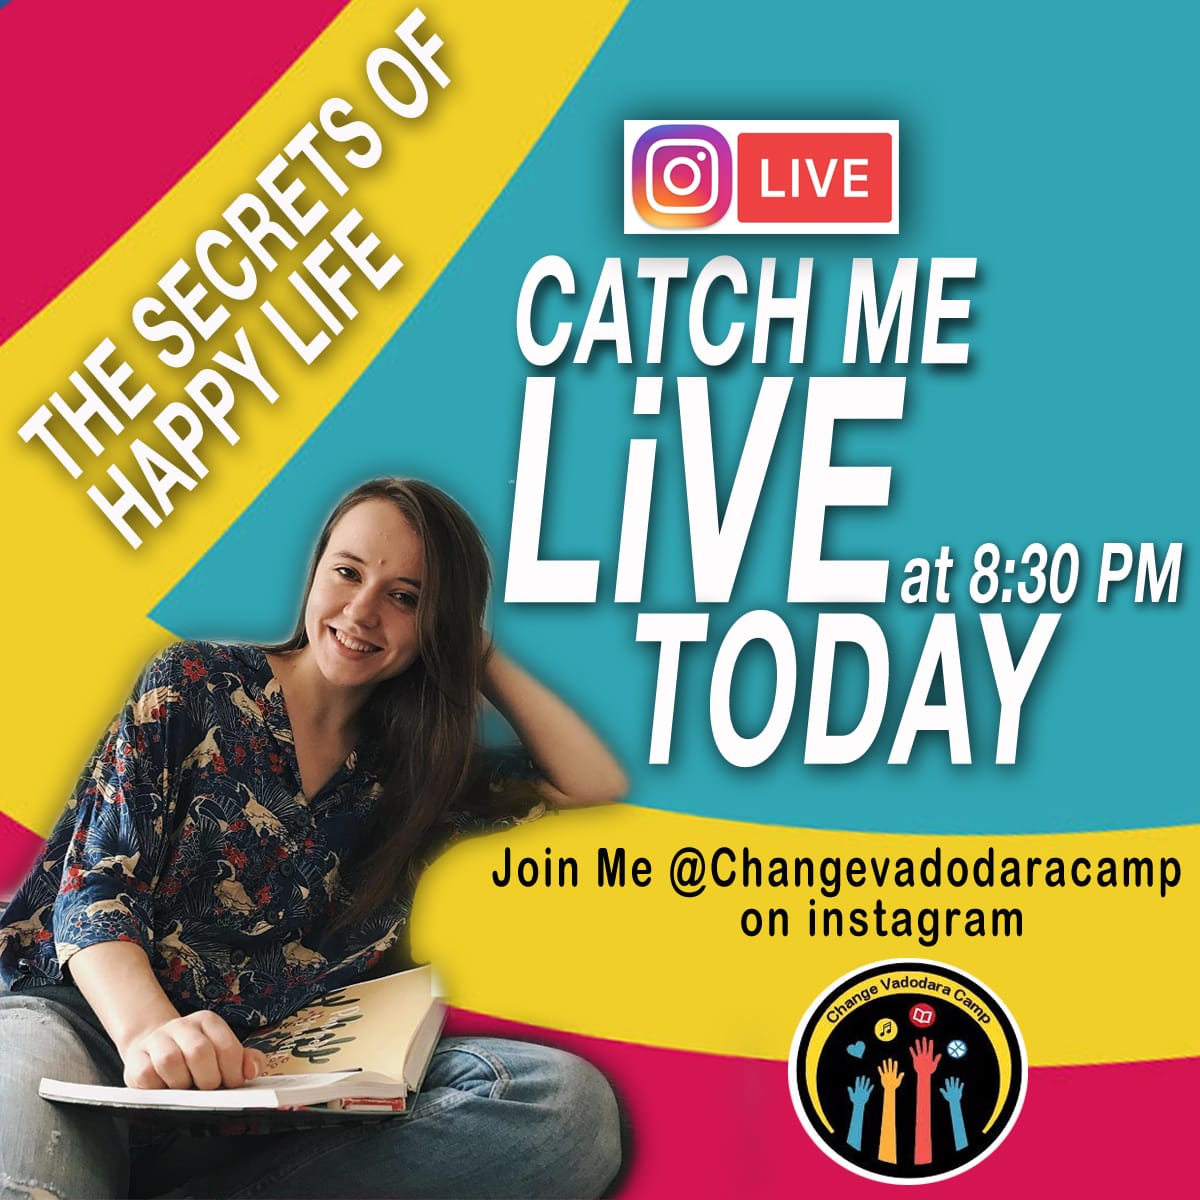 Join us live on Instagram today.

#NGO #mentalhealth #Happiness #wednesdaymorning